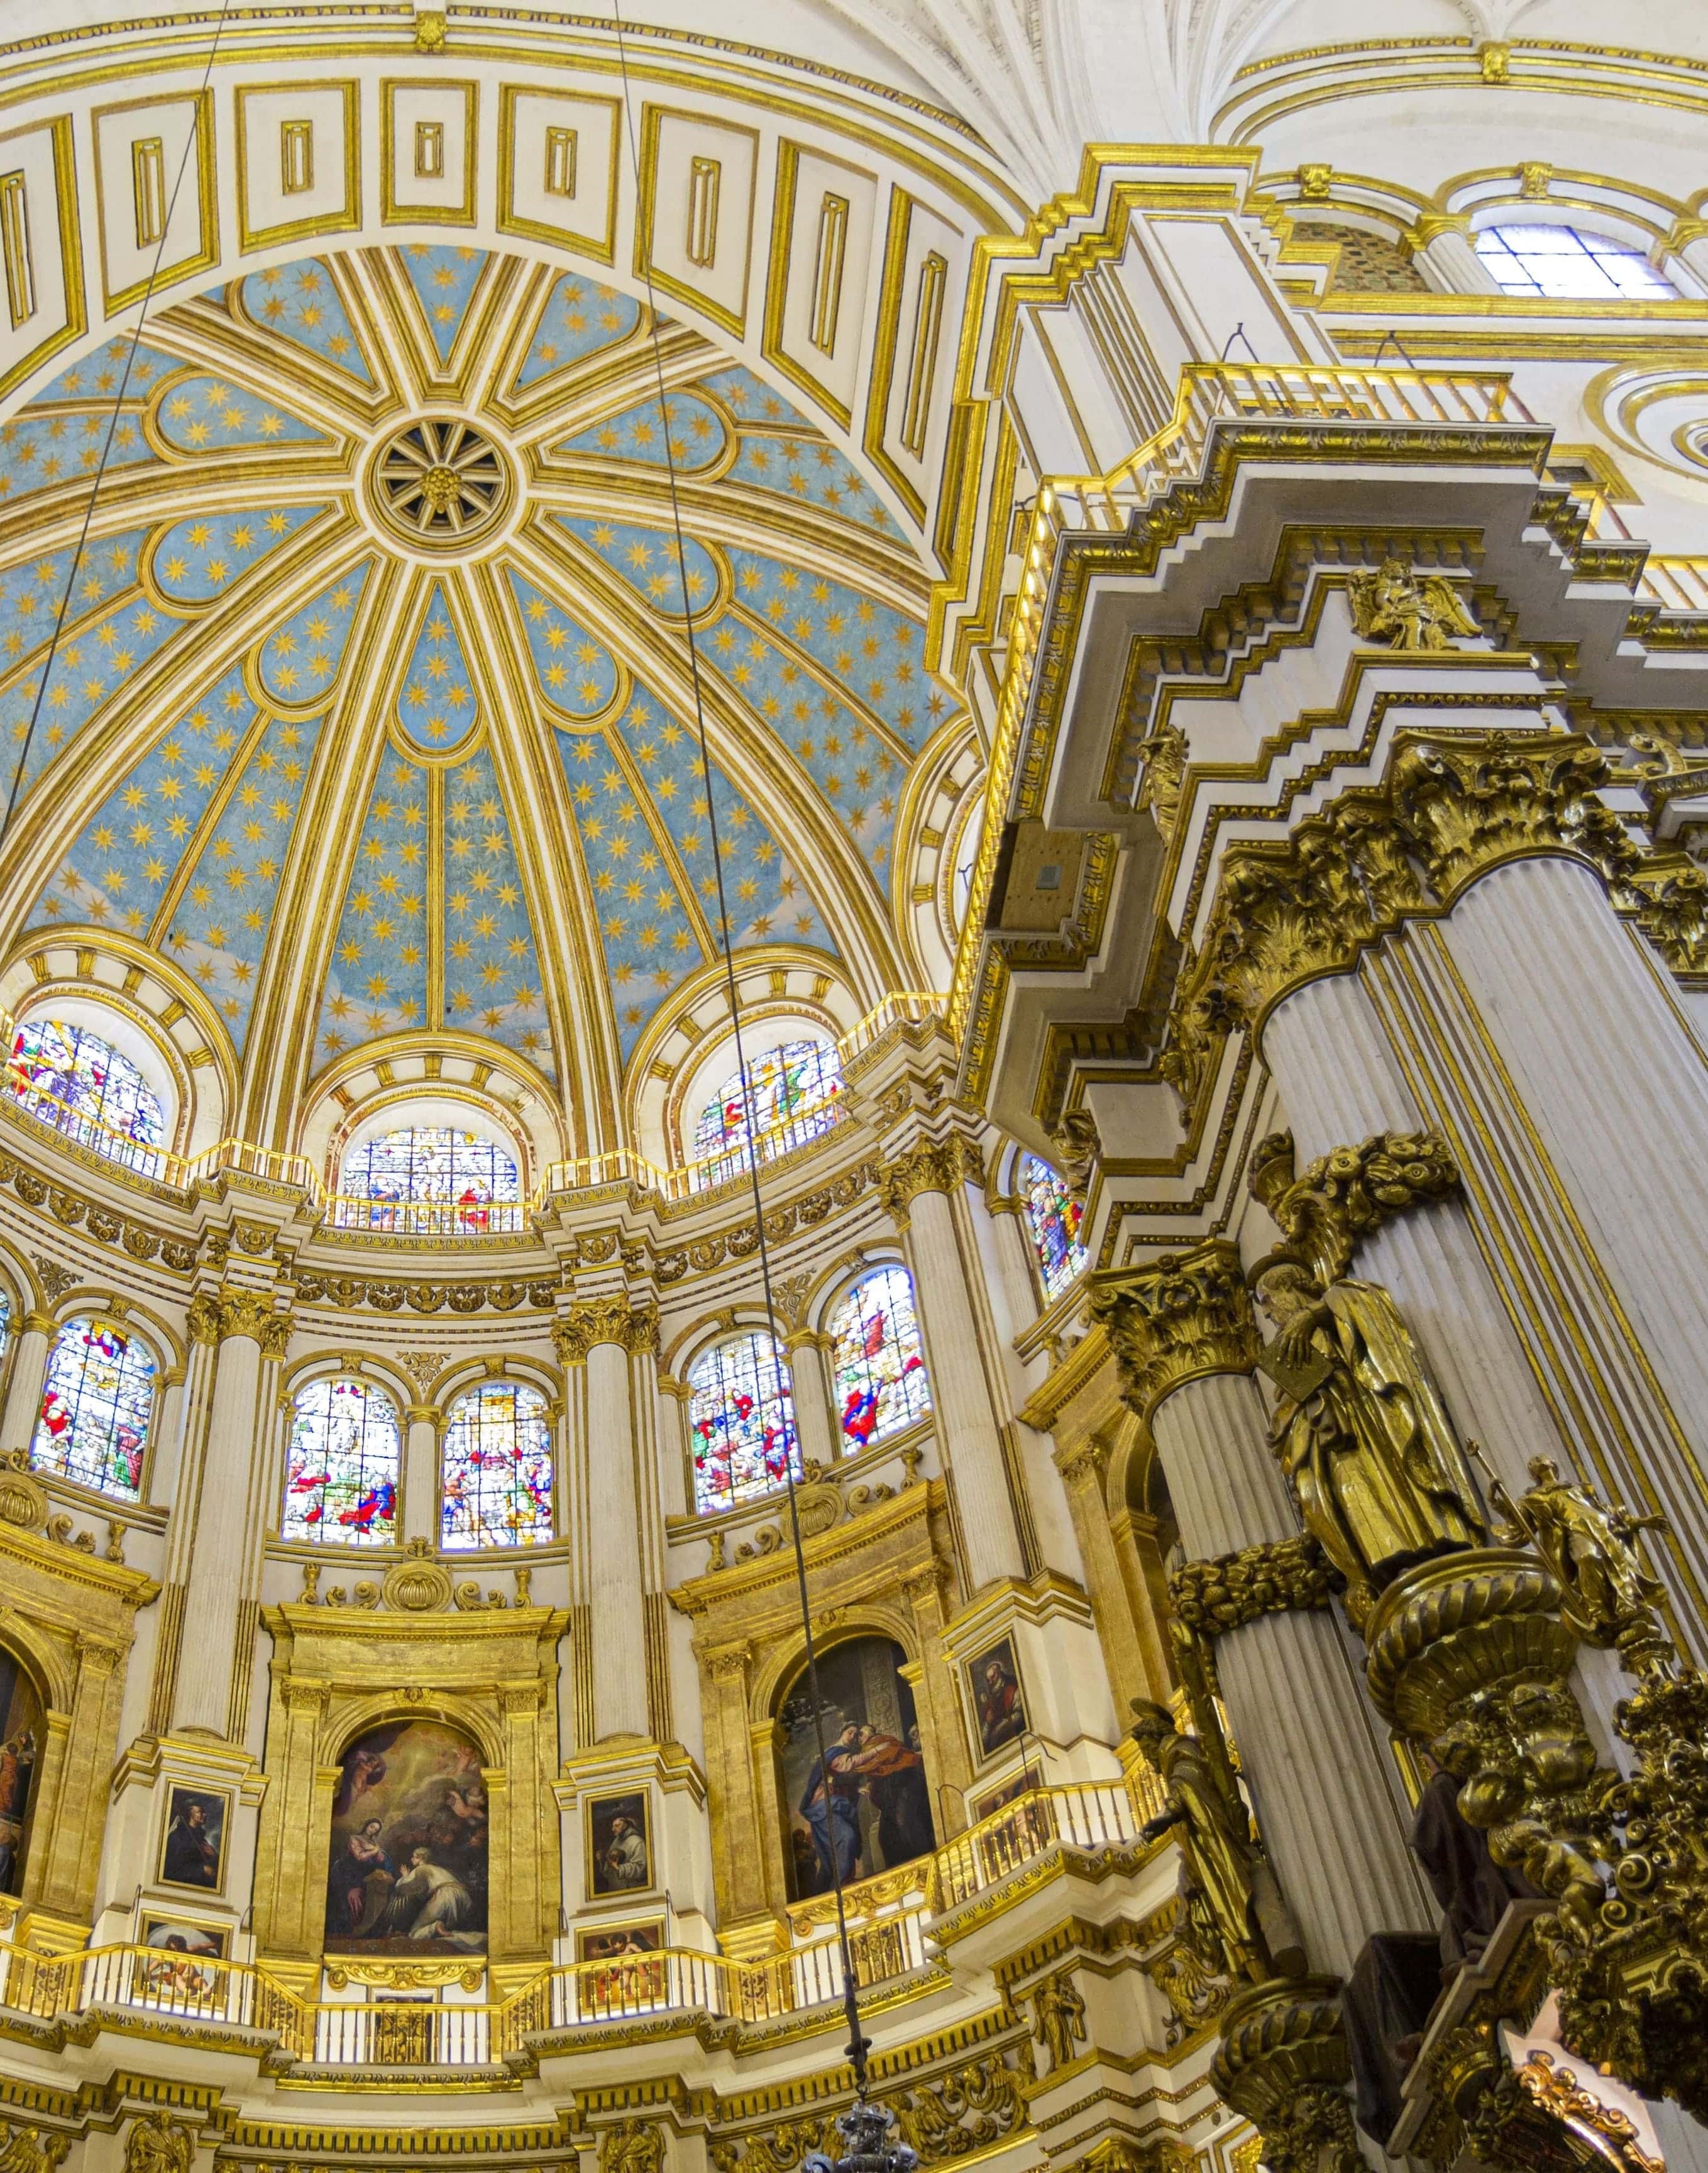 Buy tickets online to the Cathedral of Granada